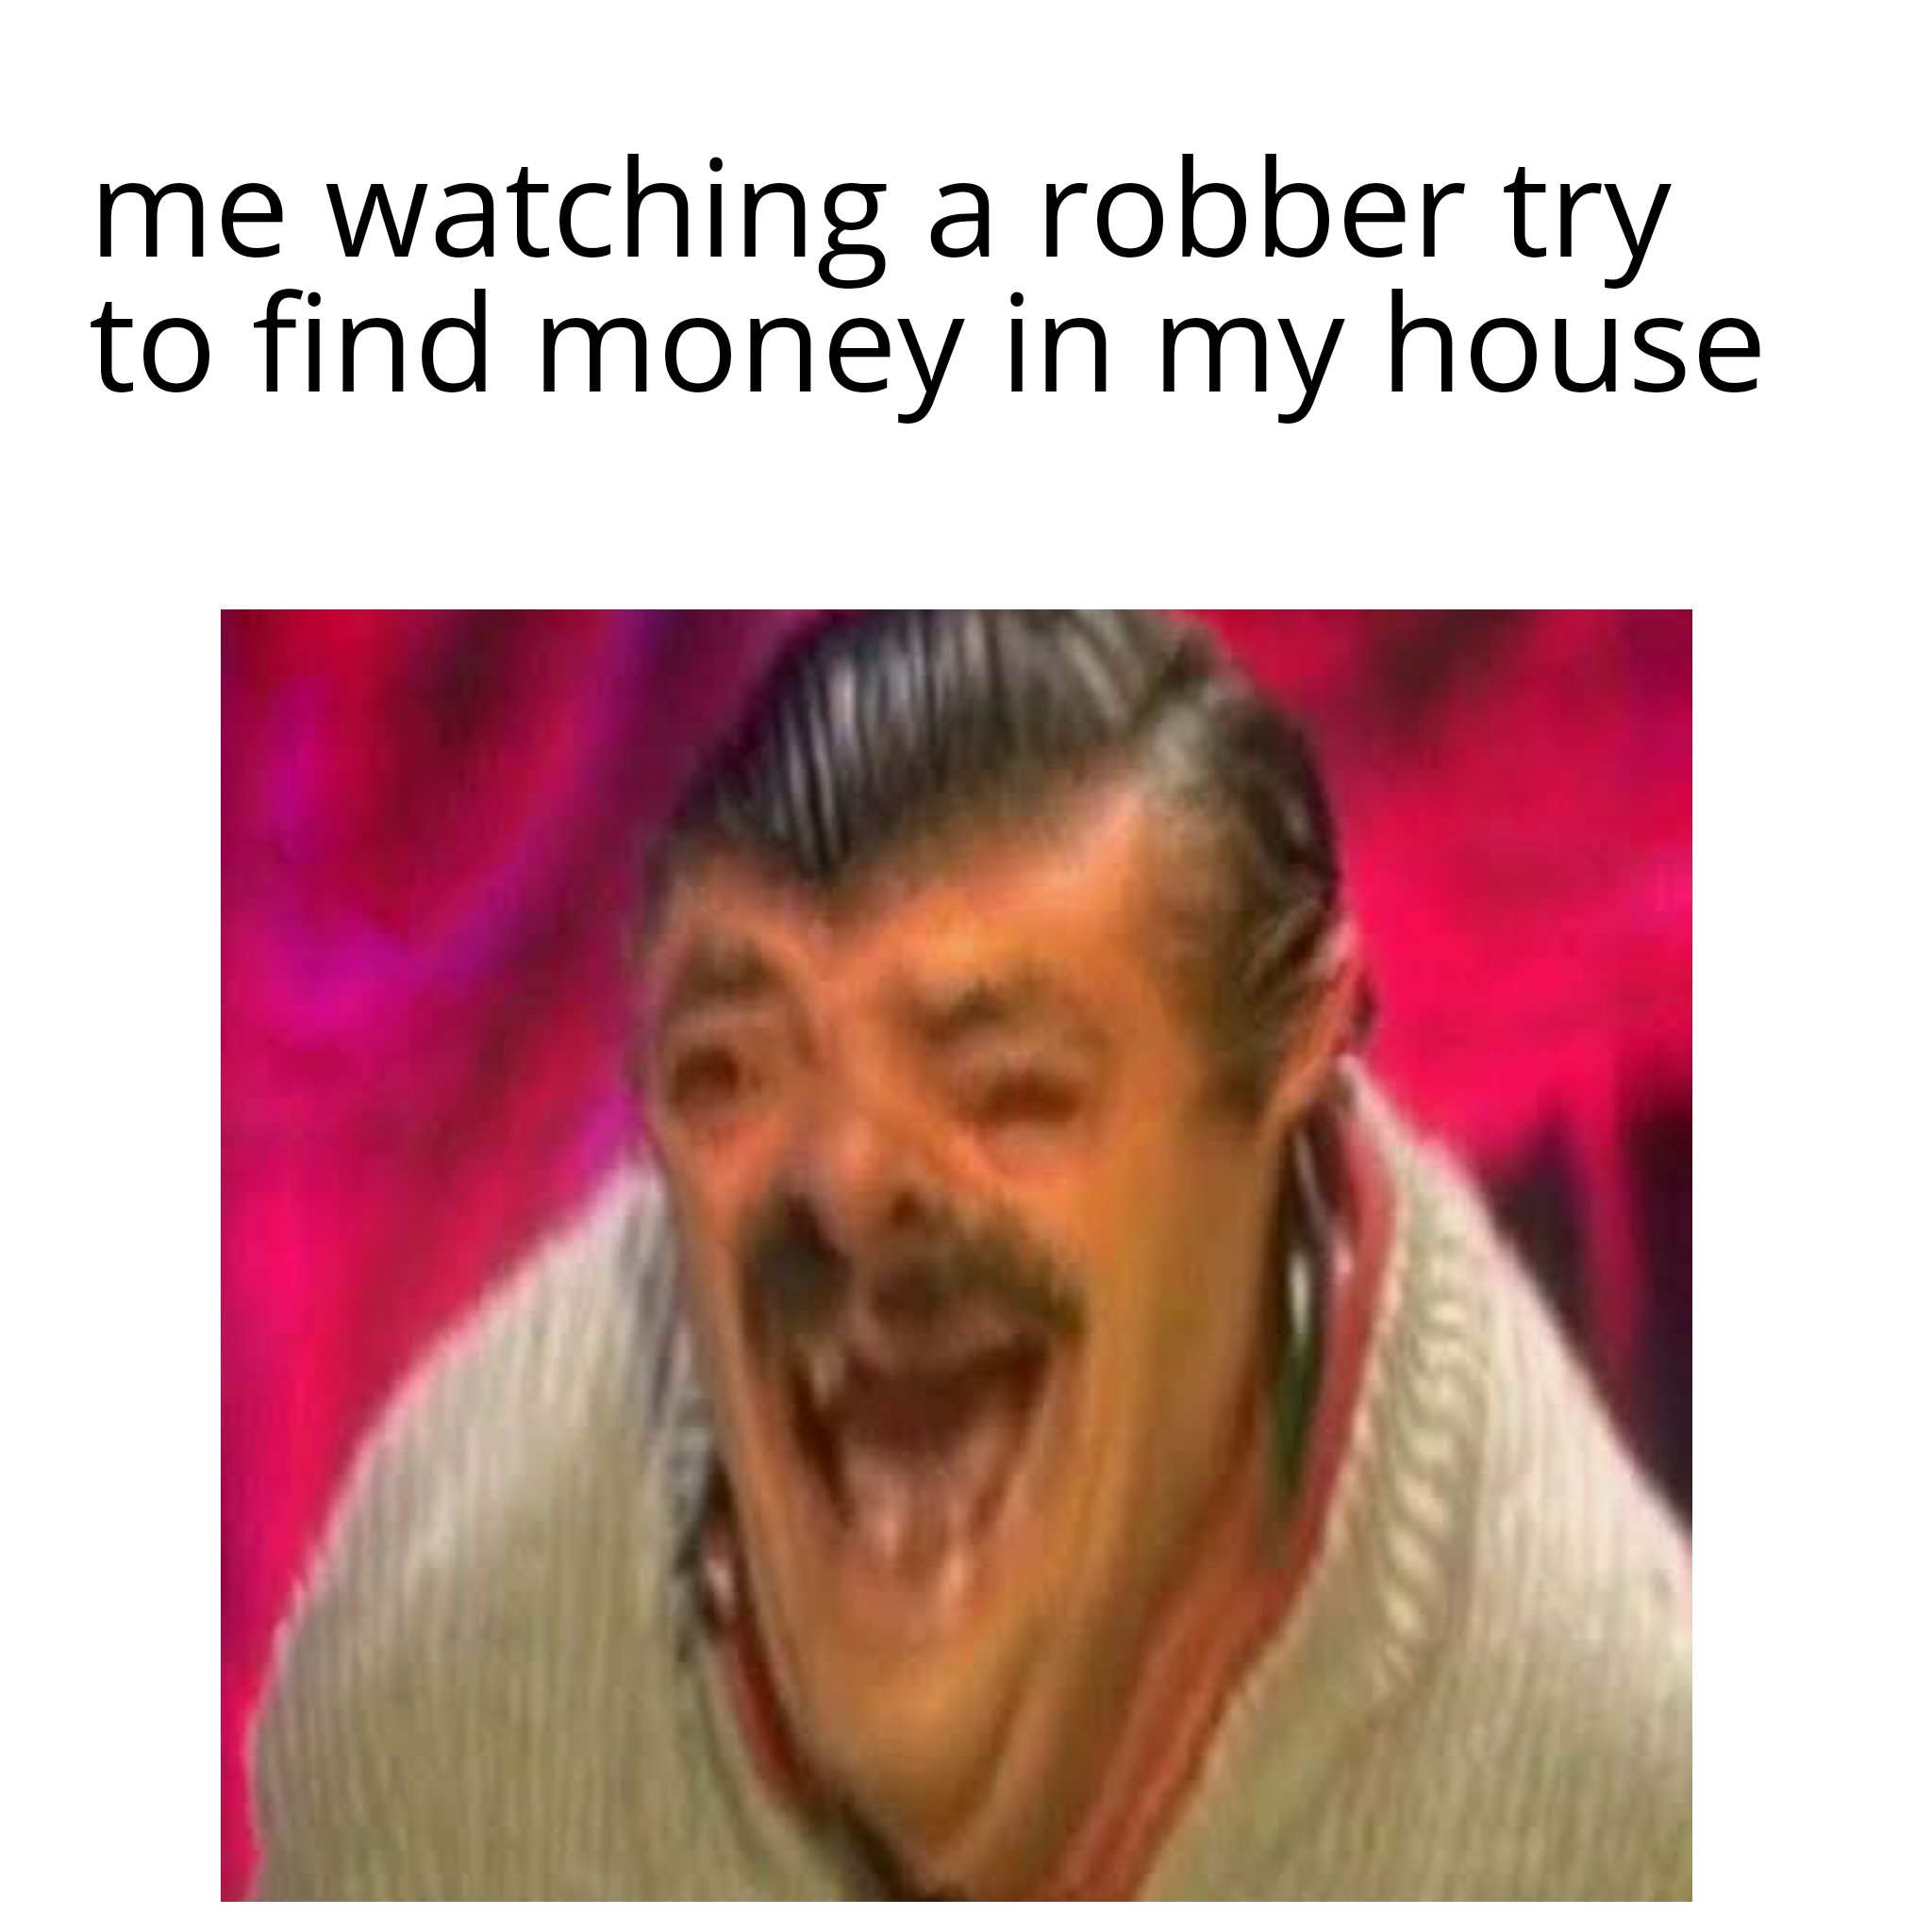 funny memes - risitas laugh meme - me watching a robber try to find money in my house